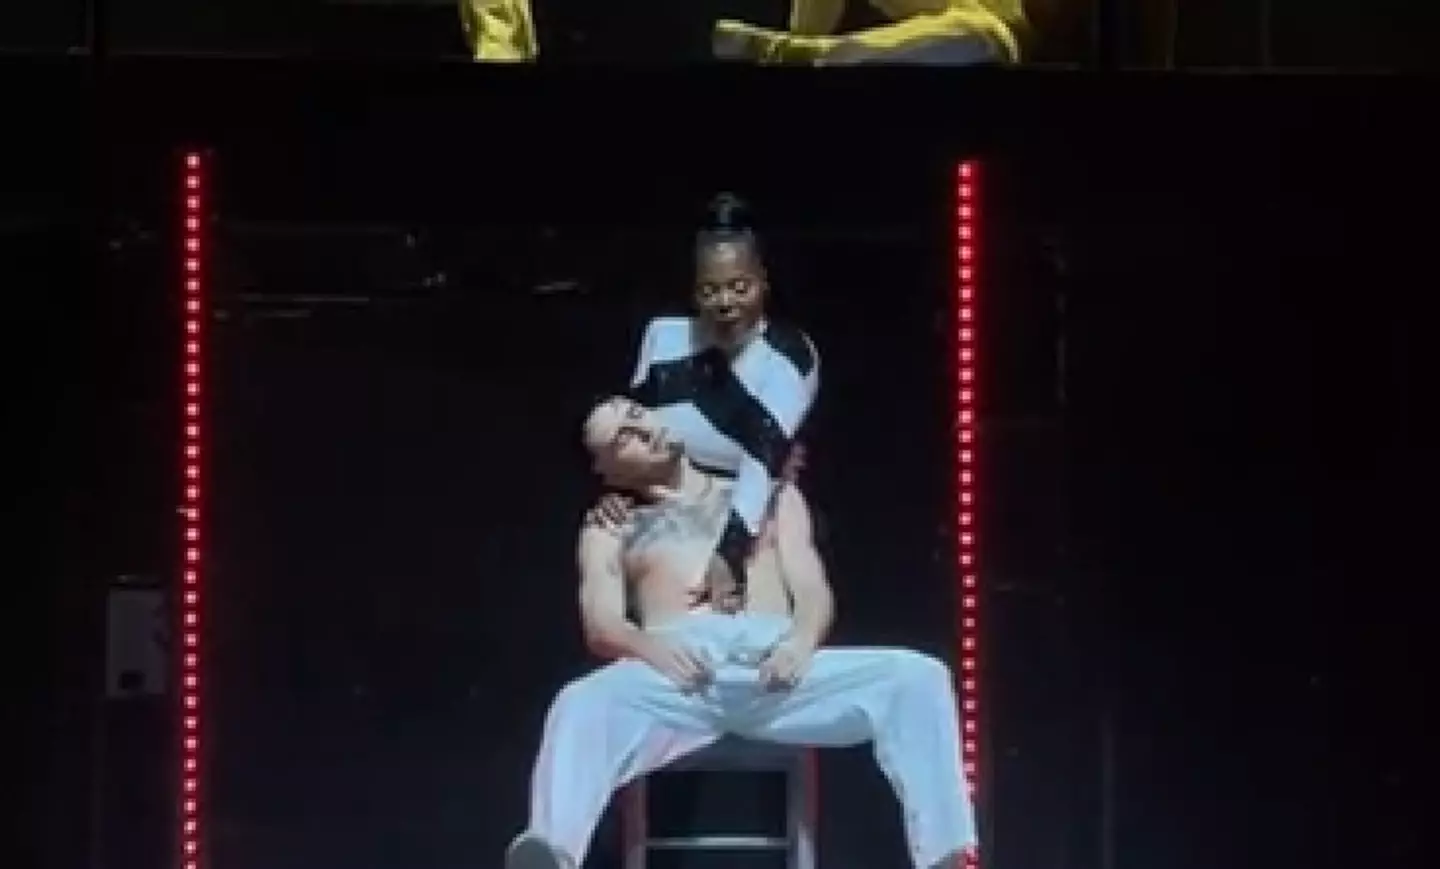 Jackson was performing on stage when her hand plunged down a backup dancer's body.